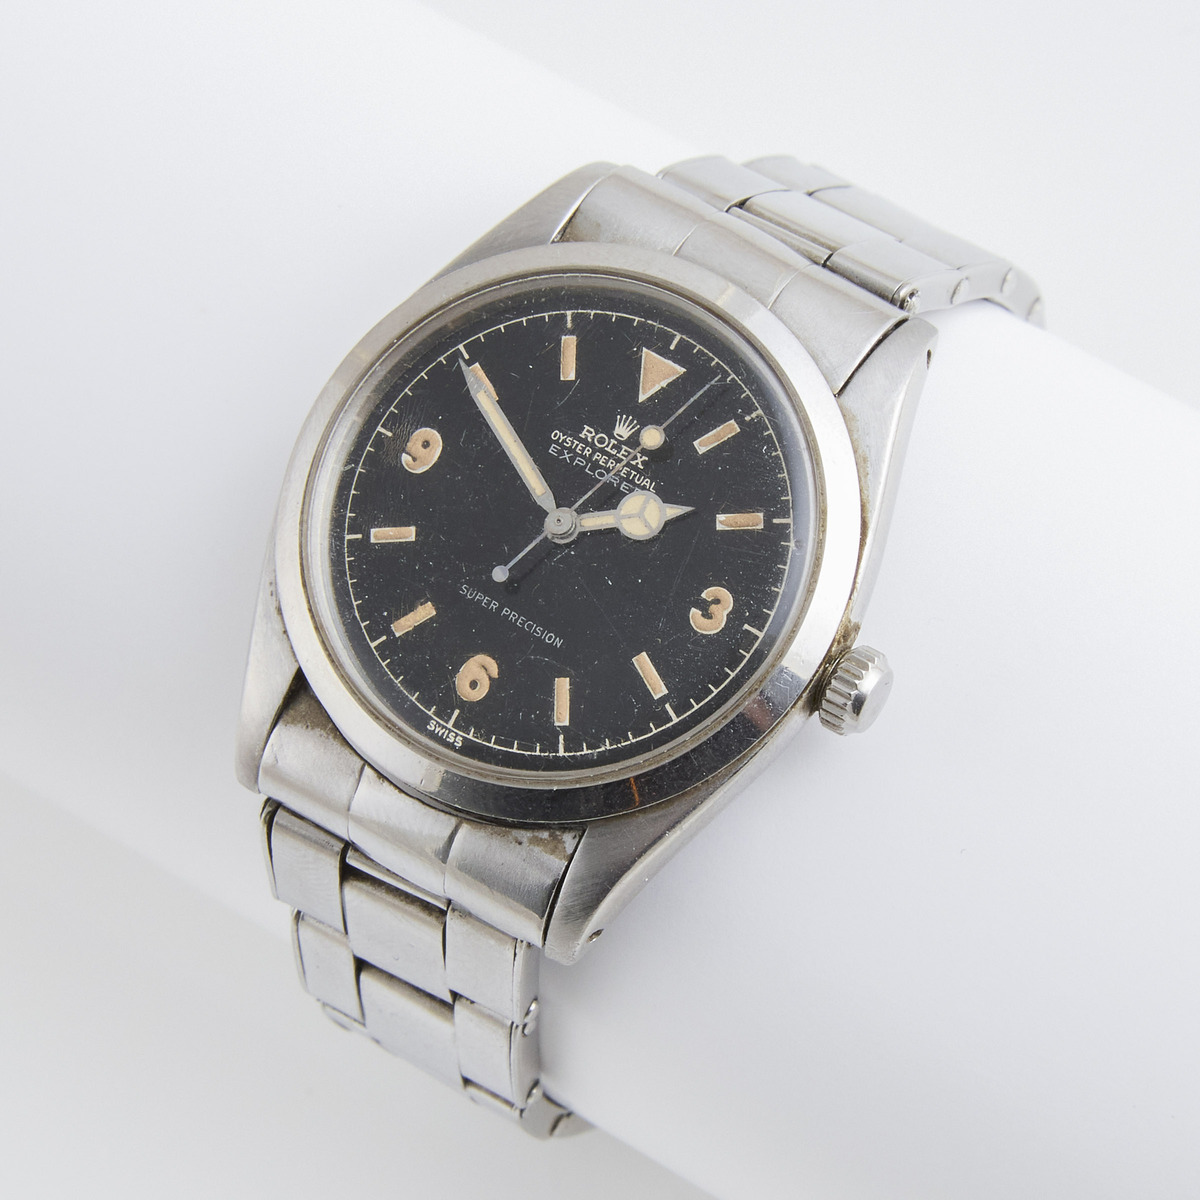 Rolex Oyster Perpetual Explorer Wristwatch, circa 1958; reference #5504; case #281869; movement #181